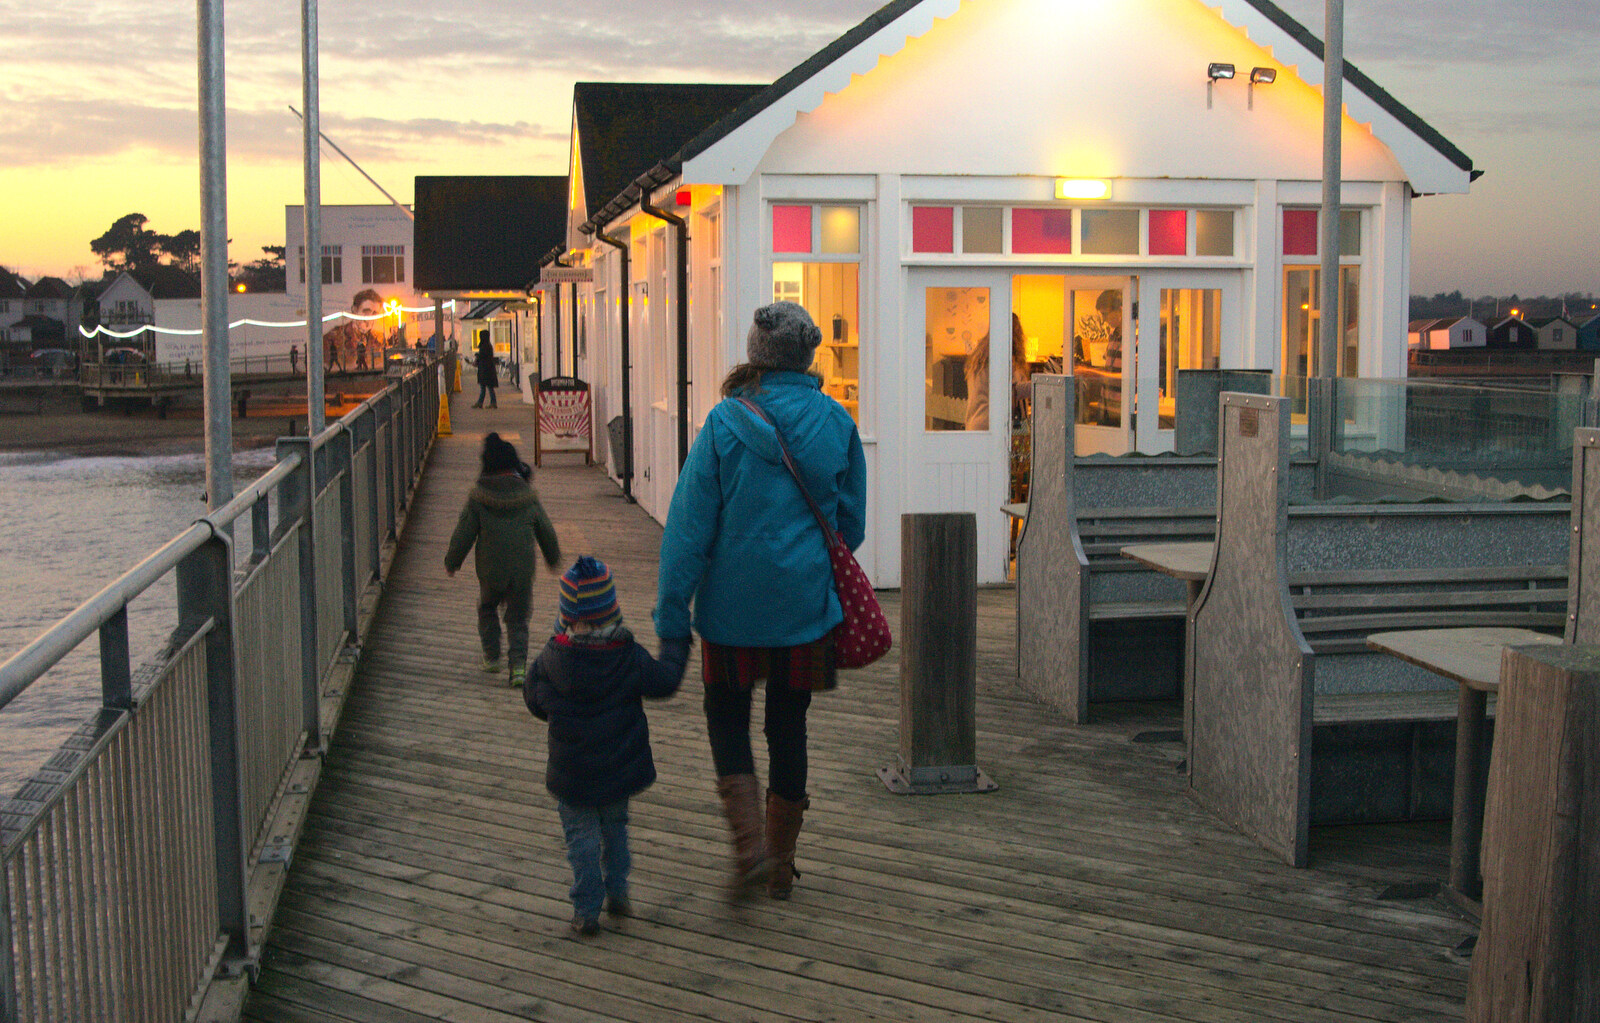 We head back down the pier from Sunset on the Beach, Southwold, Suffolk - 30th December 2014